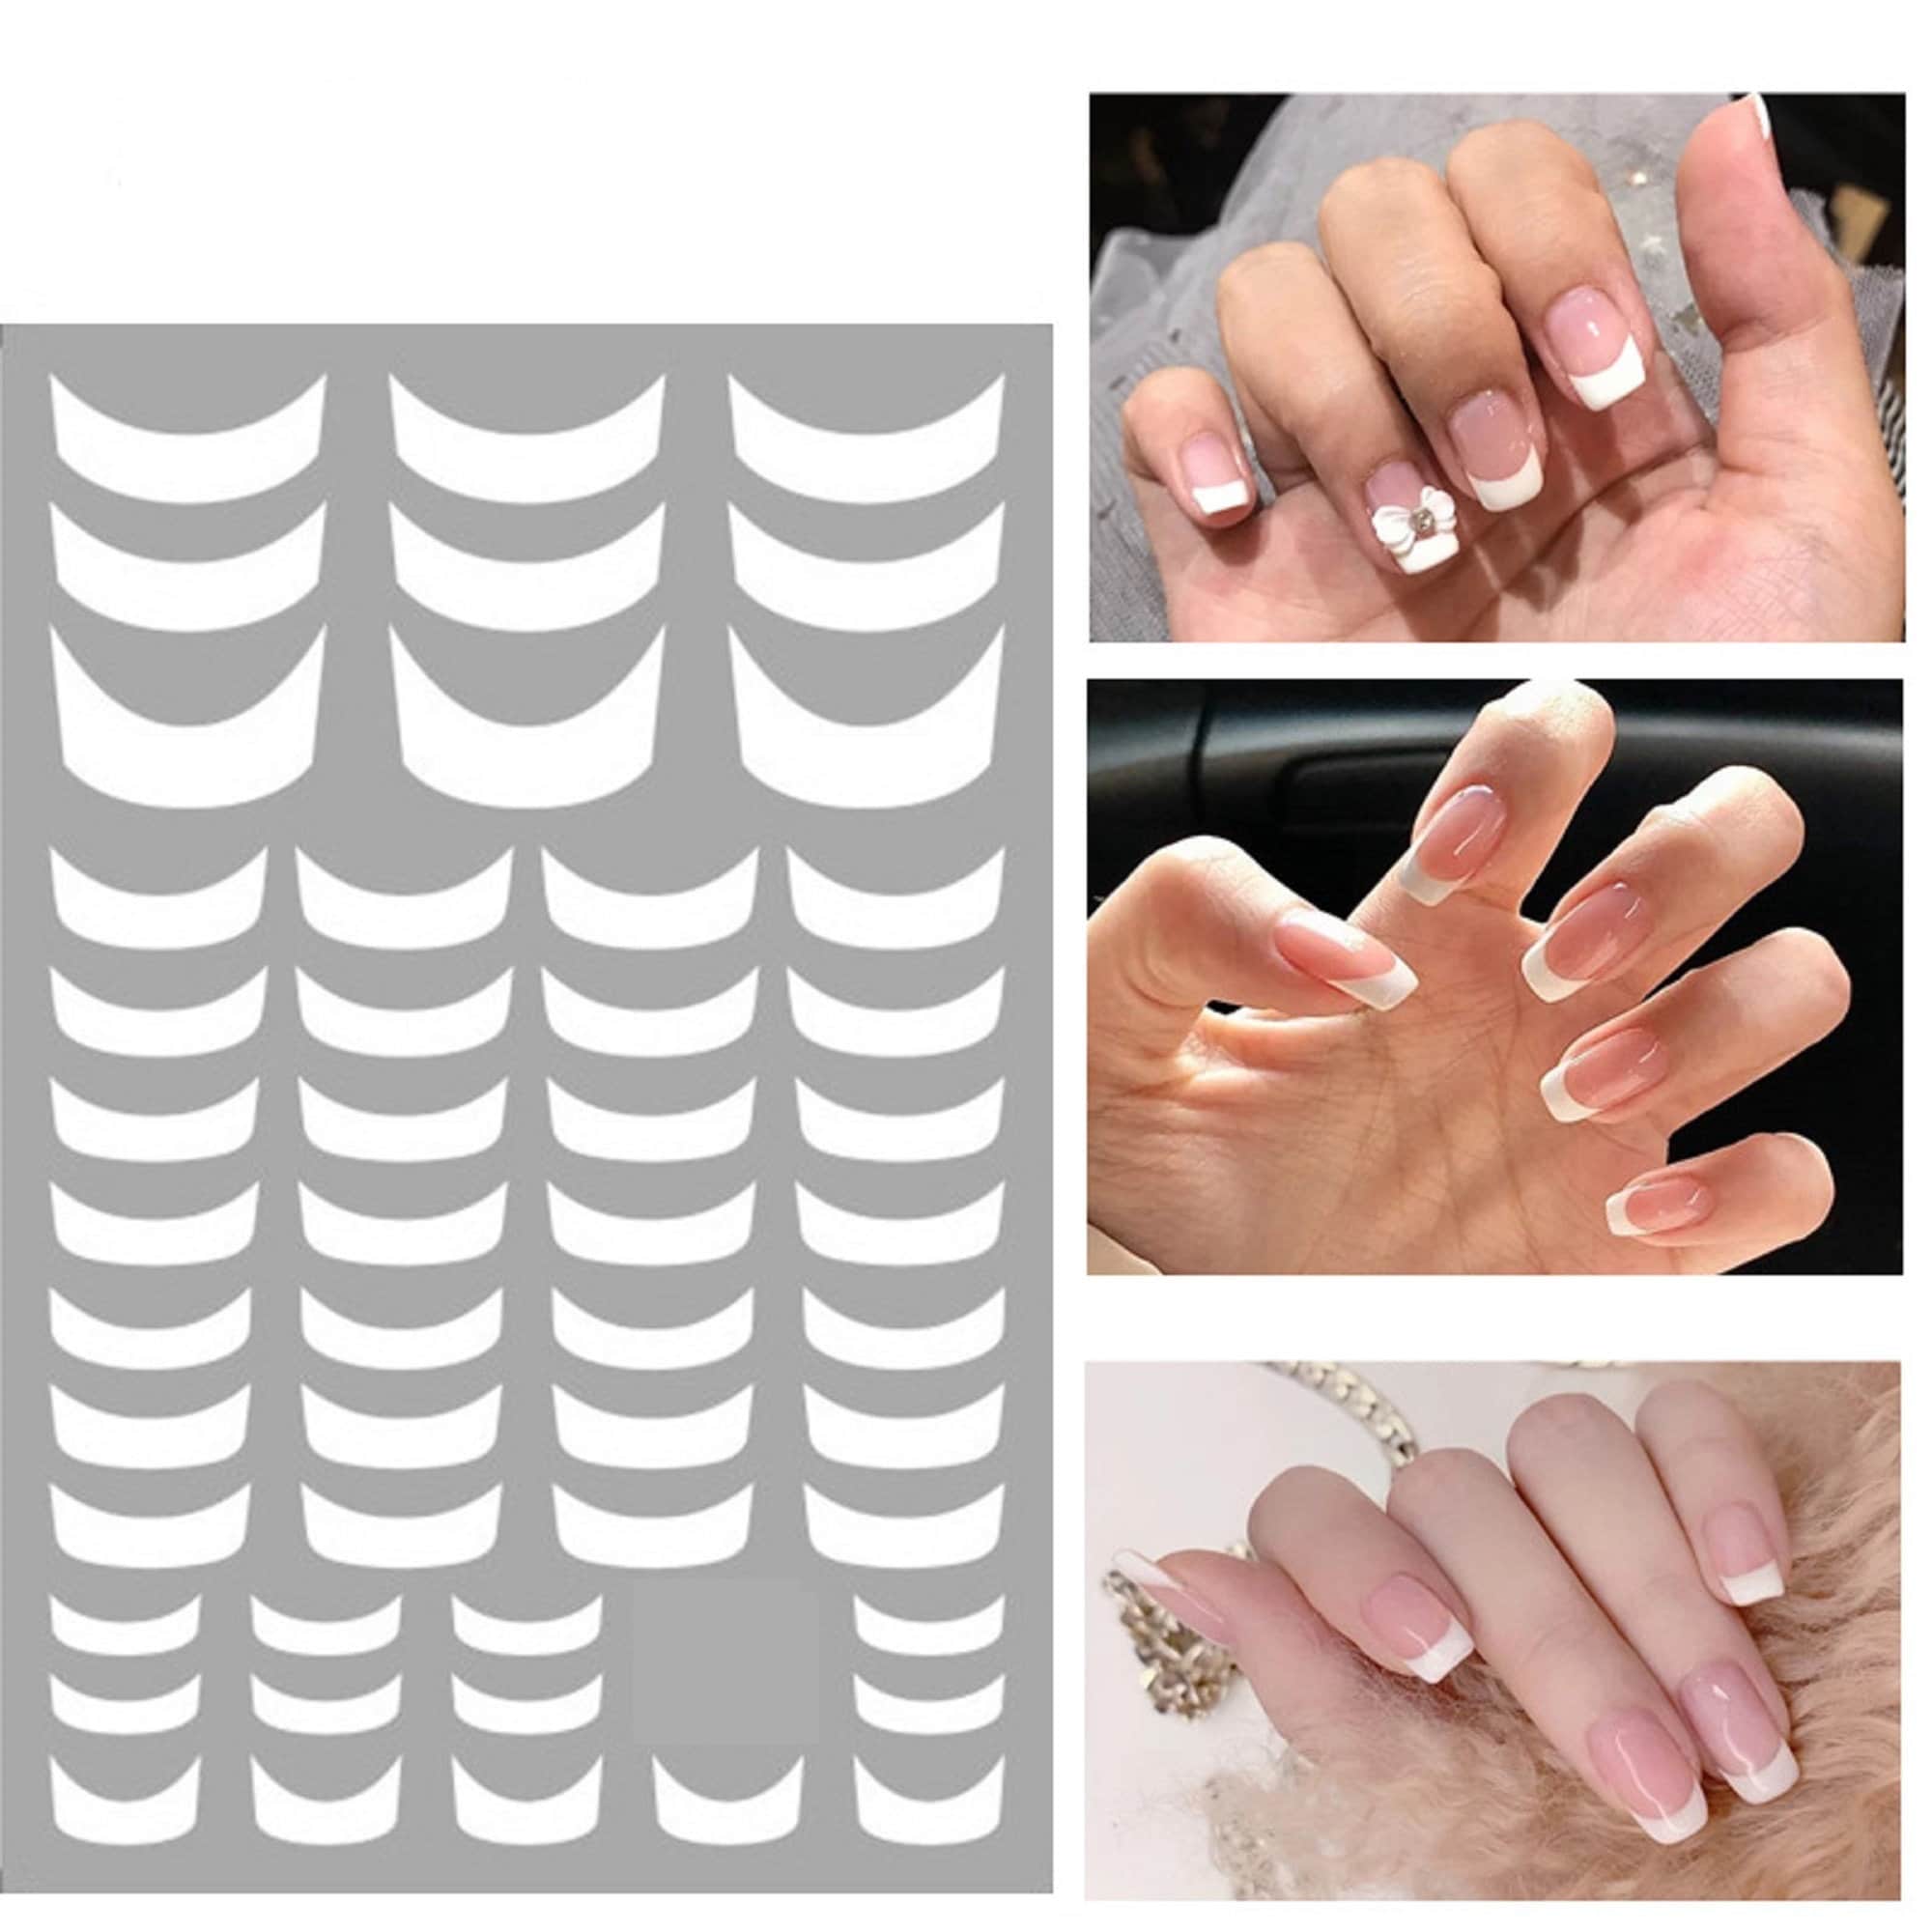 Nail Art Stickers Decals Transfers White French Nail Tips Stencils Lace  Manicure Lines (R351)